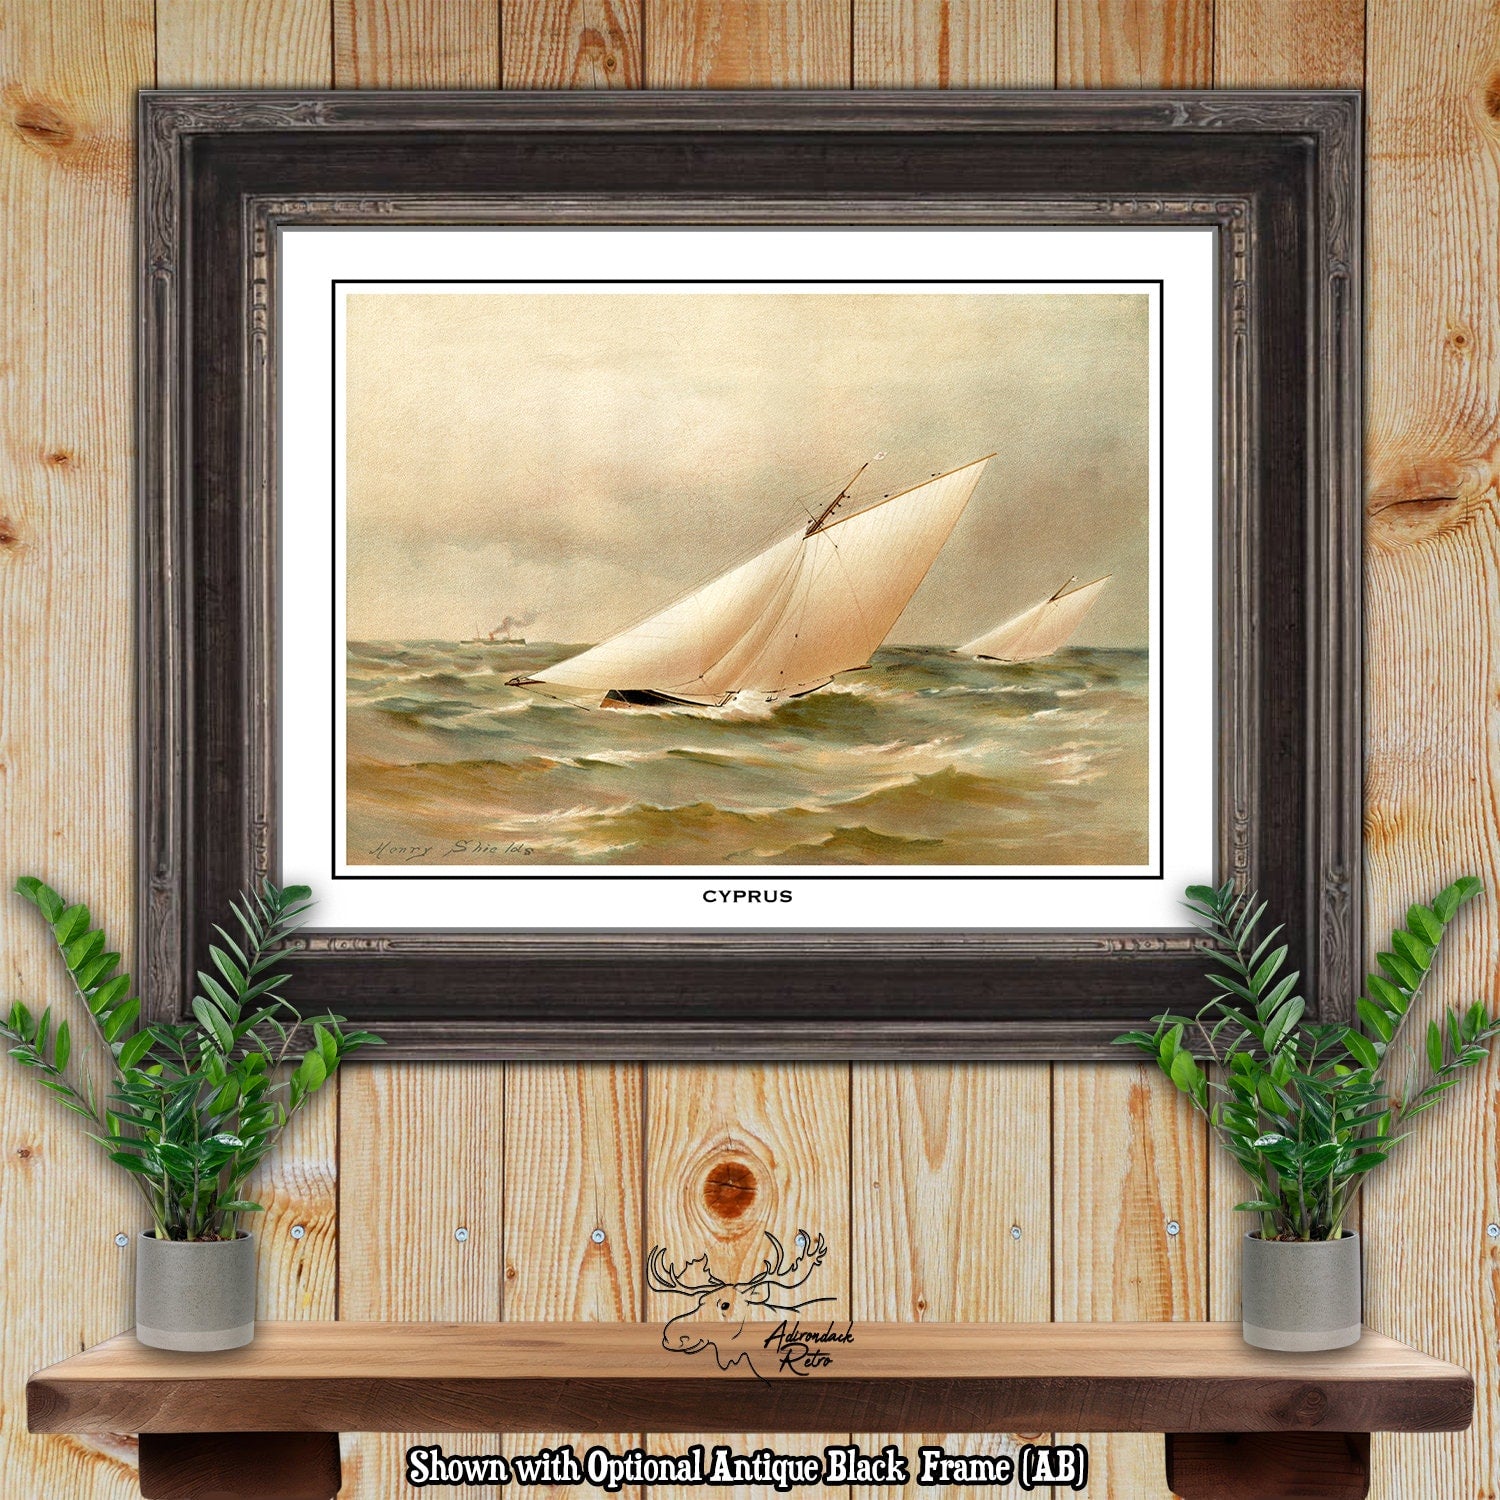 Clyde Yacht Cyprus by Henry Shields Giclee Fine Art Print at Adirondack Retro